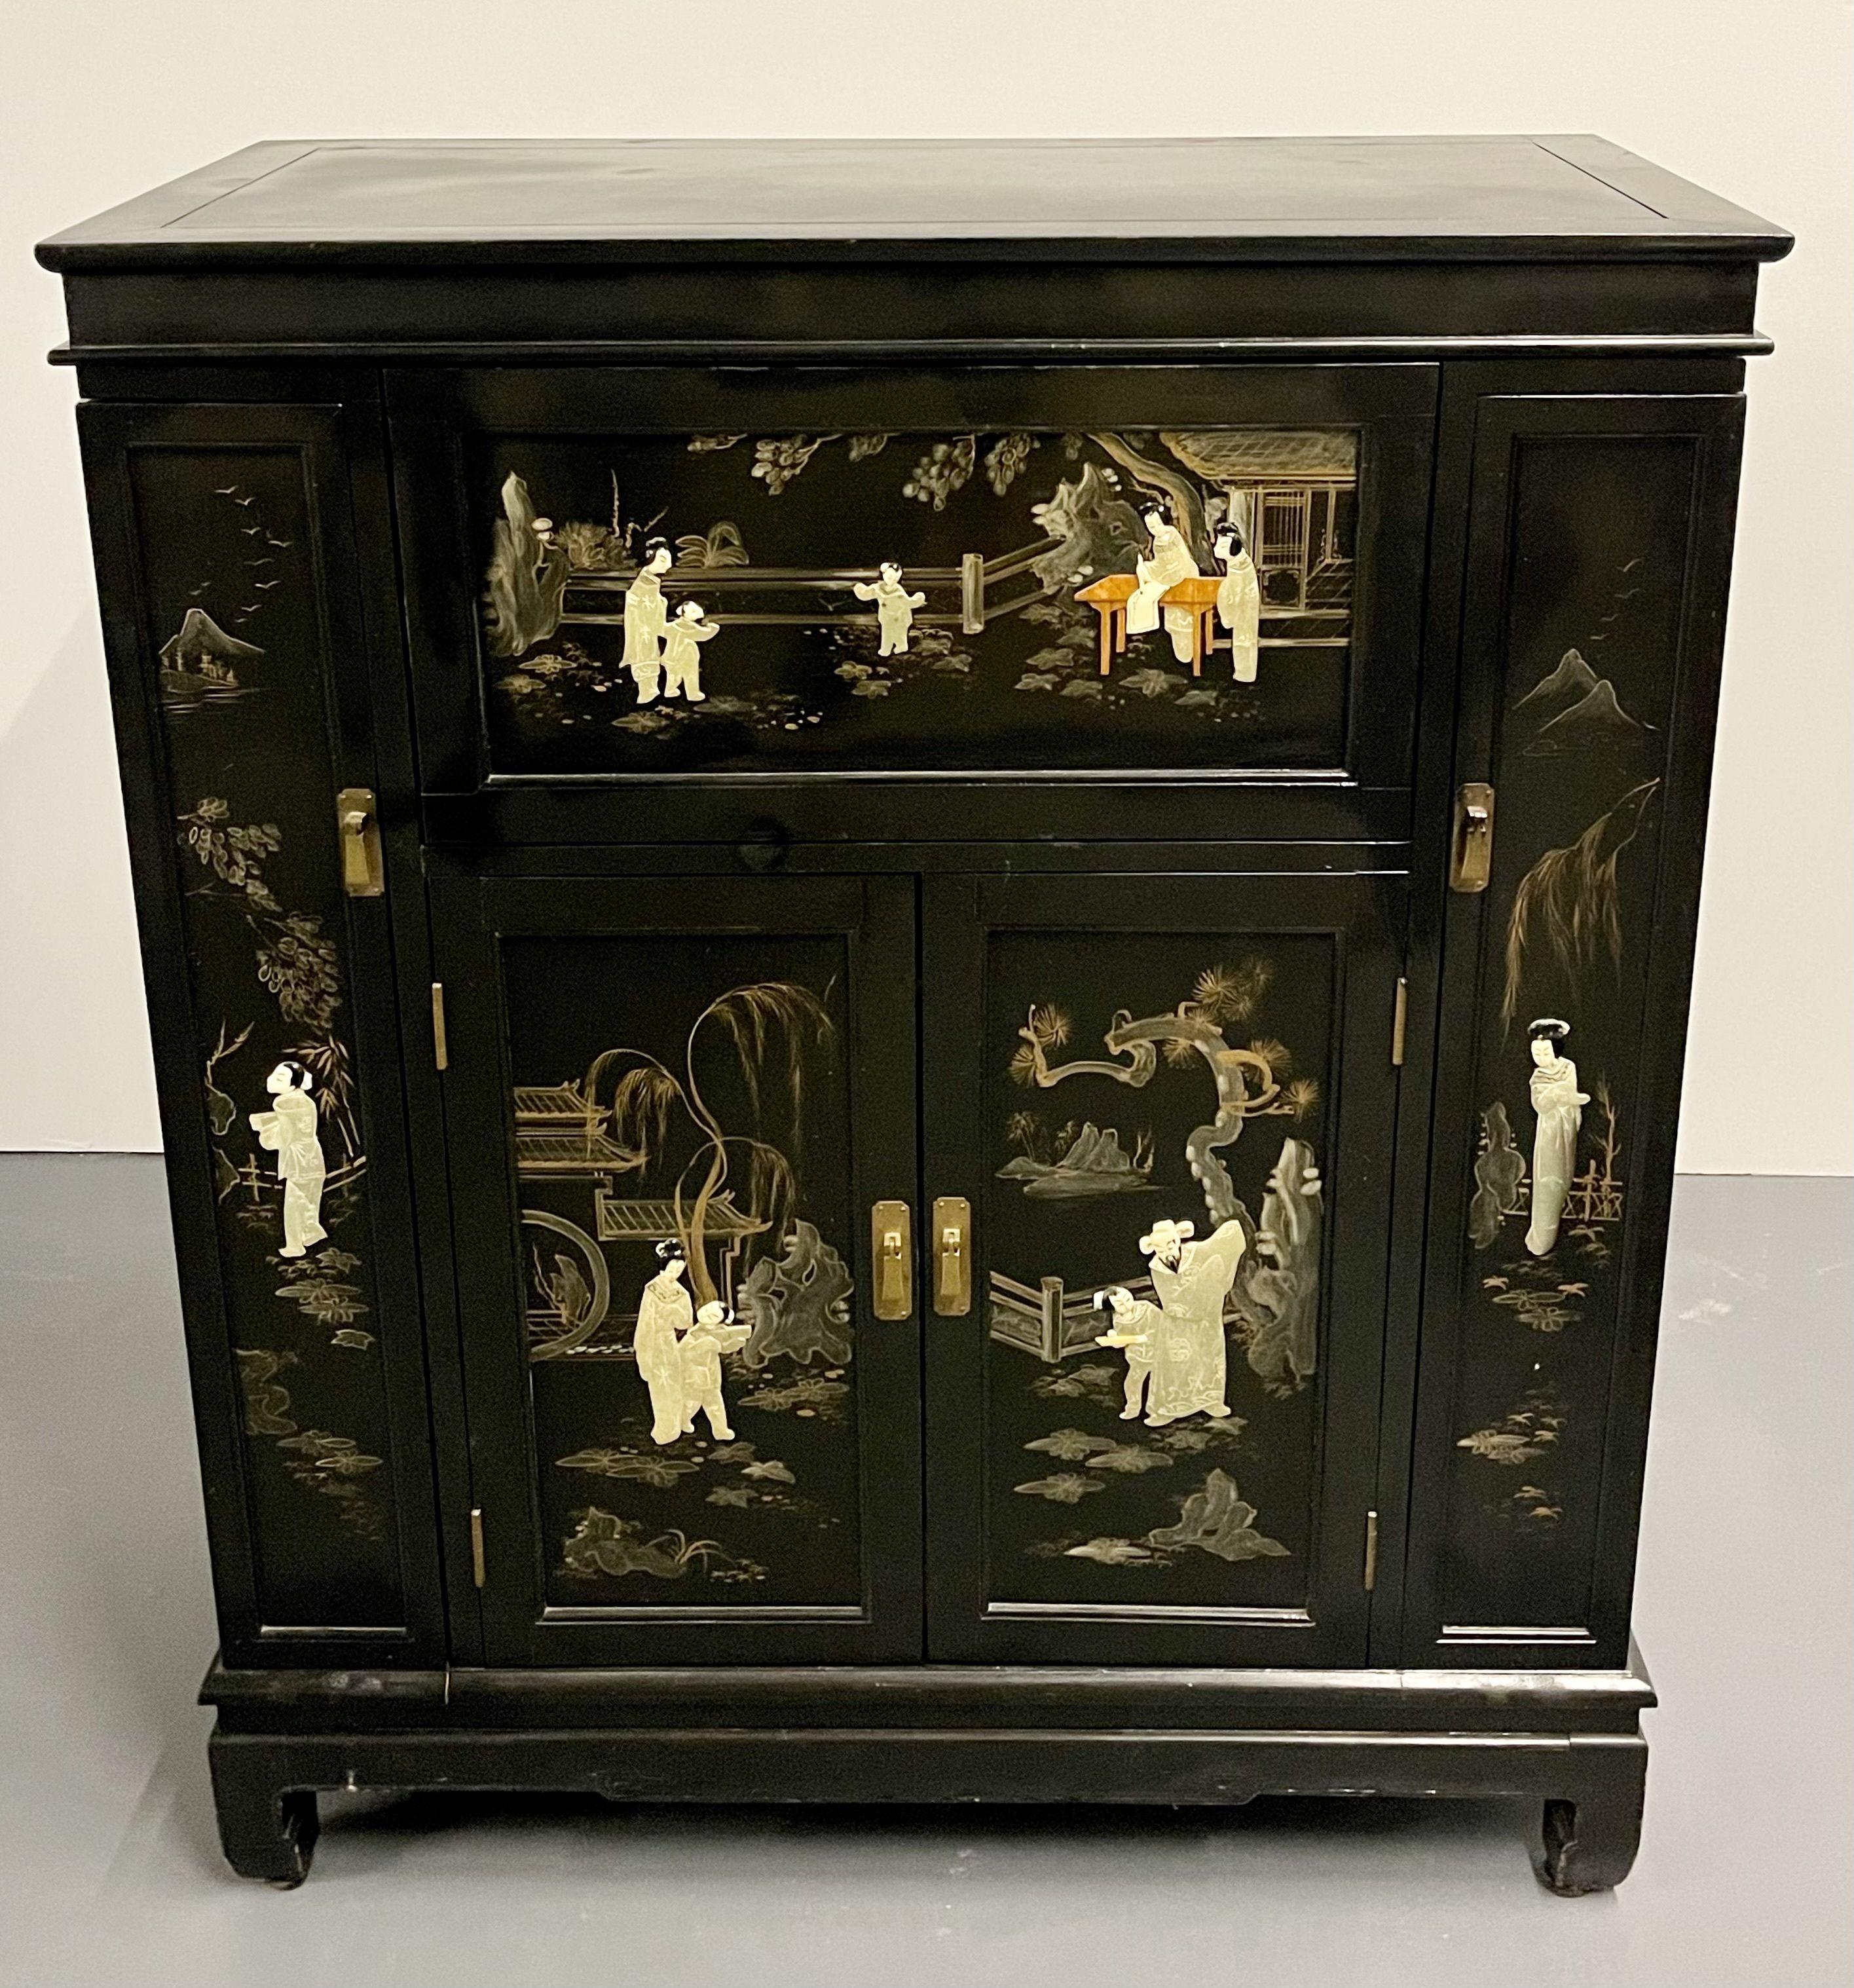 Chinese Export lacquered bar. Ebony Raised Figure Carvings with Pearl and Jade colors in the Chinoiserie Fashion. This finely and highly functional bar has a lever adjustable bottle tray and pull out lower bottle shelf. The case having two large